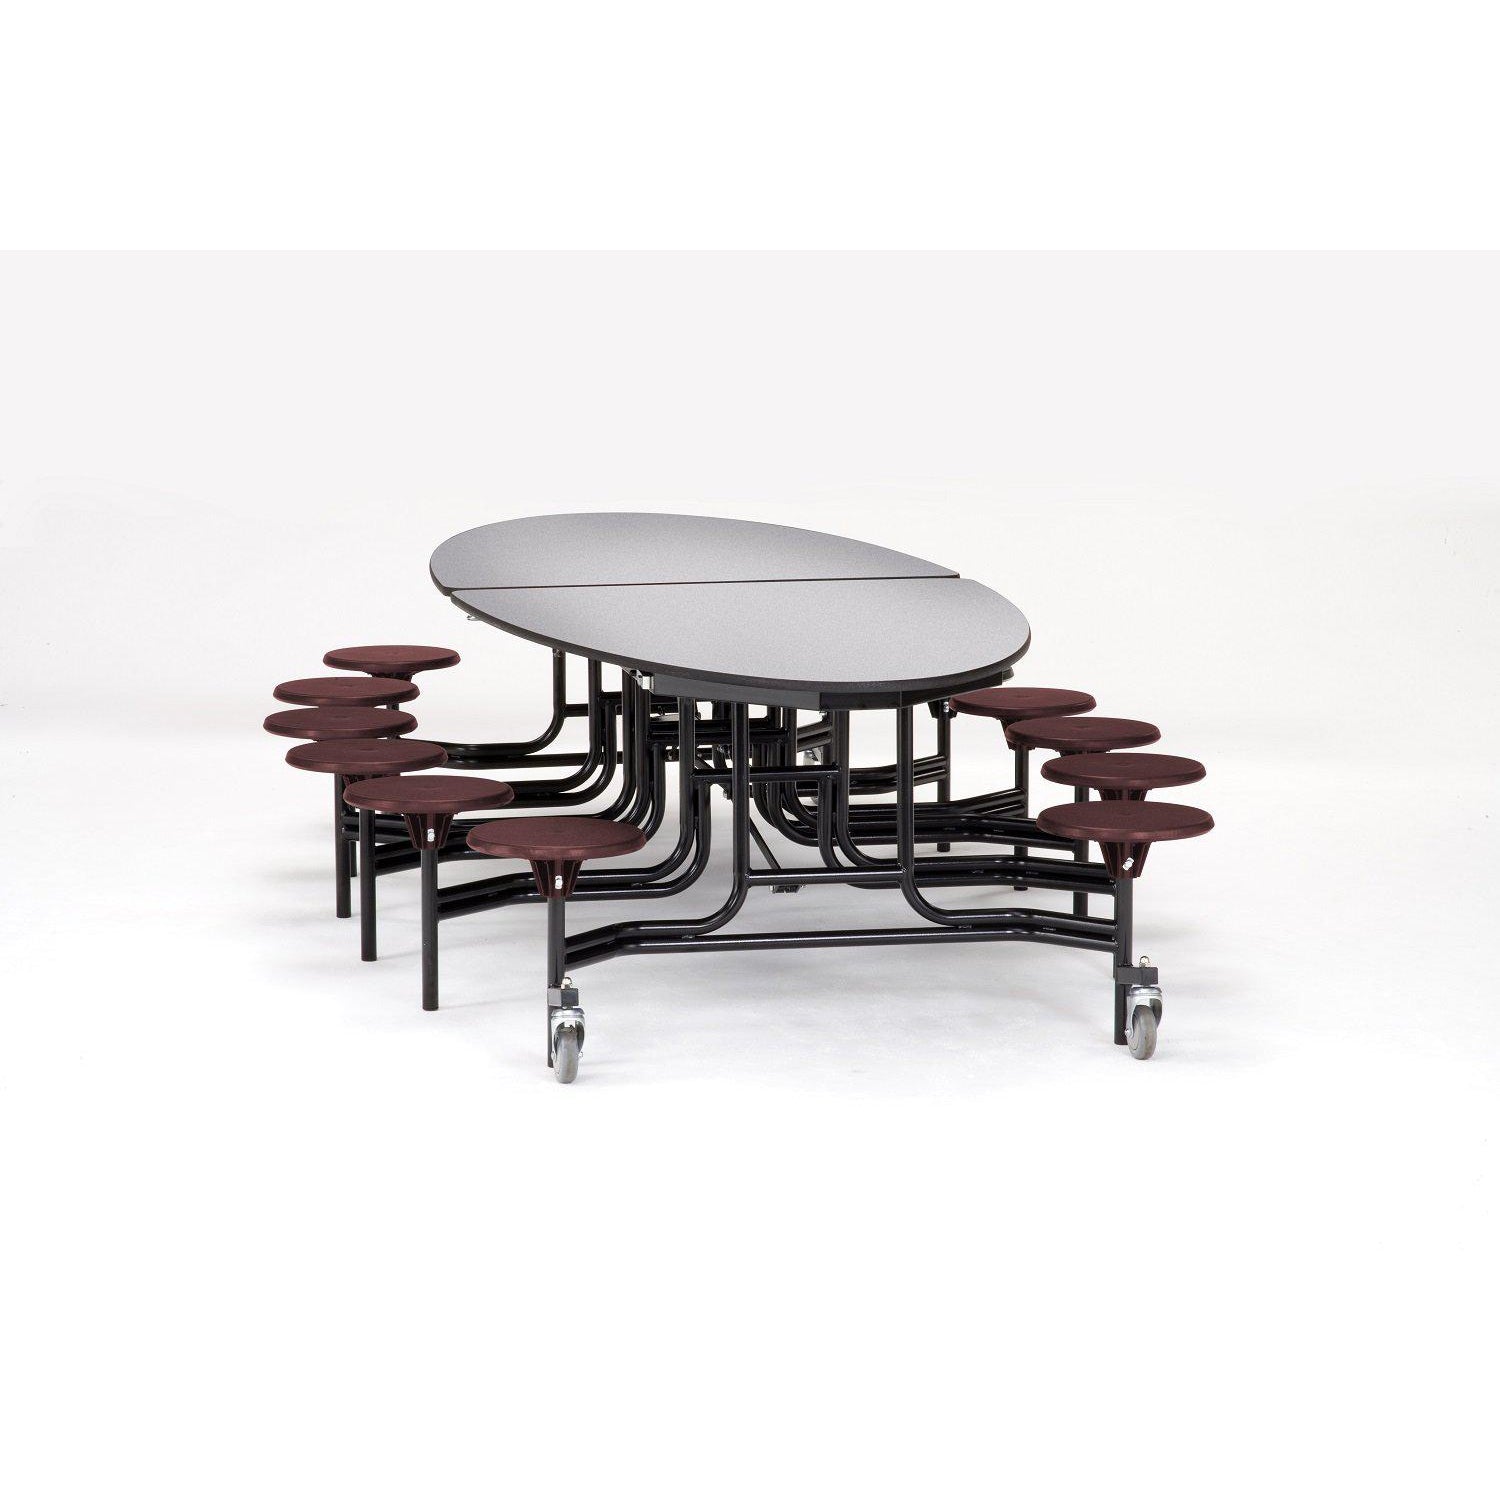 Mobile Cafeteria Table with 12 Stools, 10' Elliptical, Particleboard Core, Vinyl T-Mold Edge, Textured Black Frame